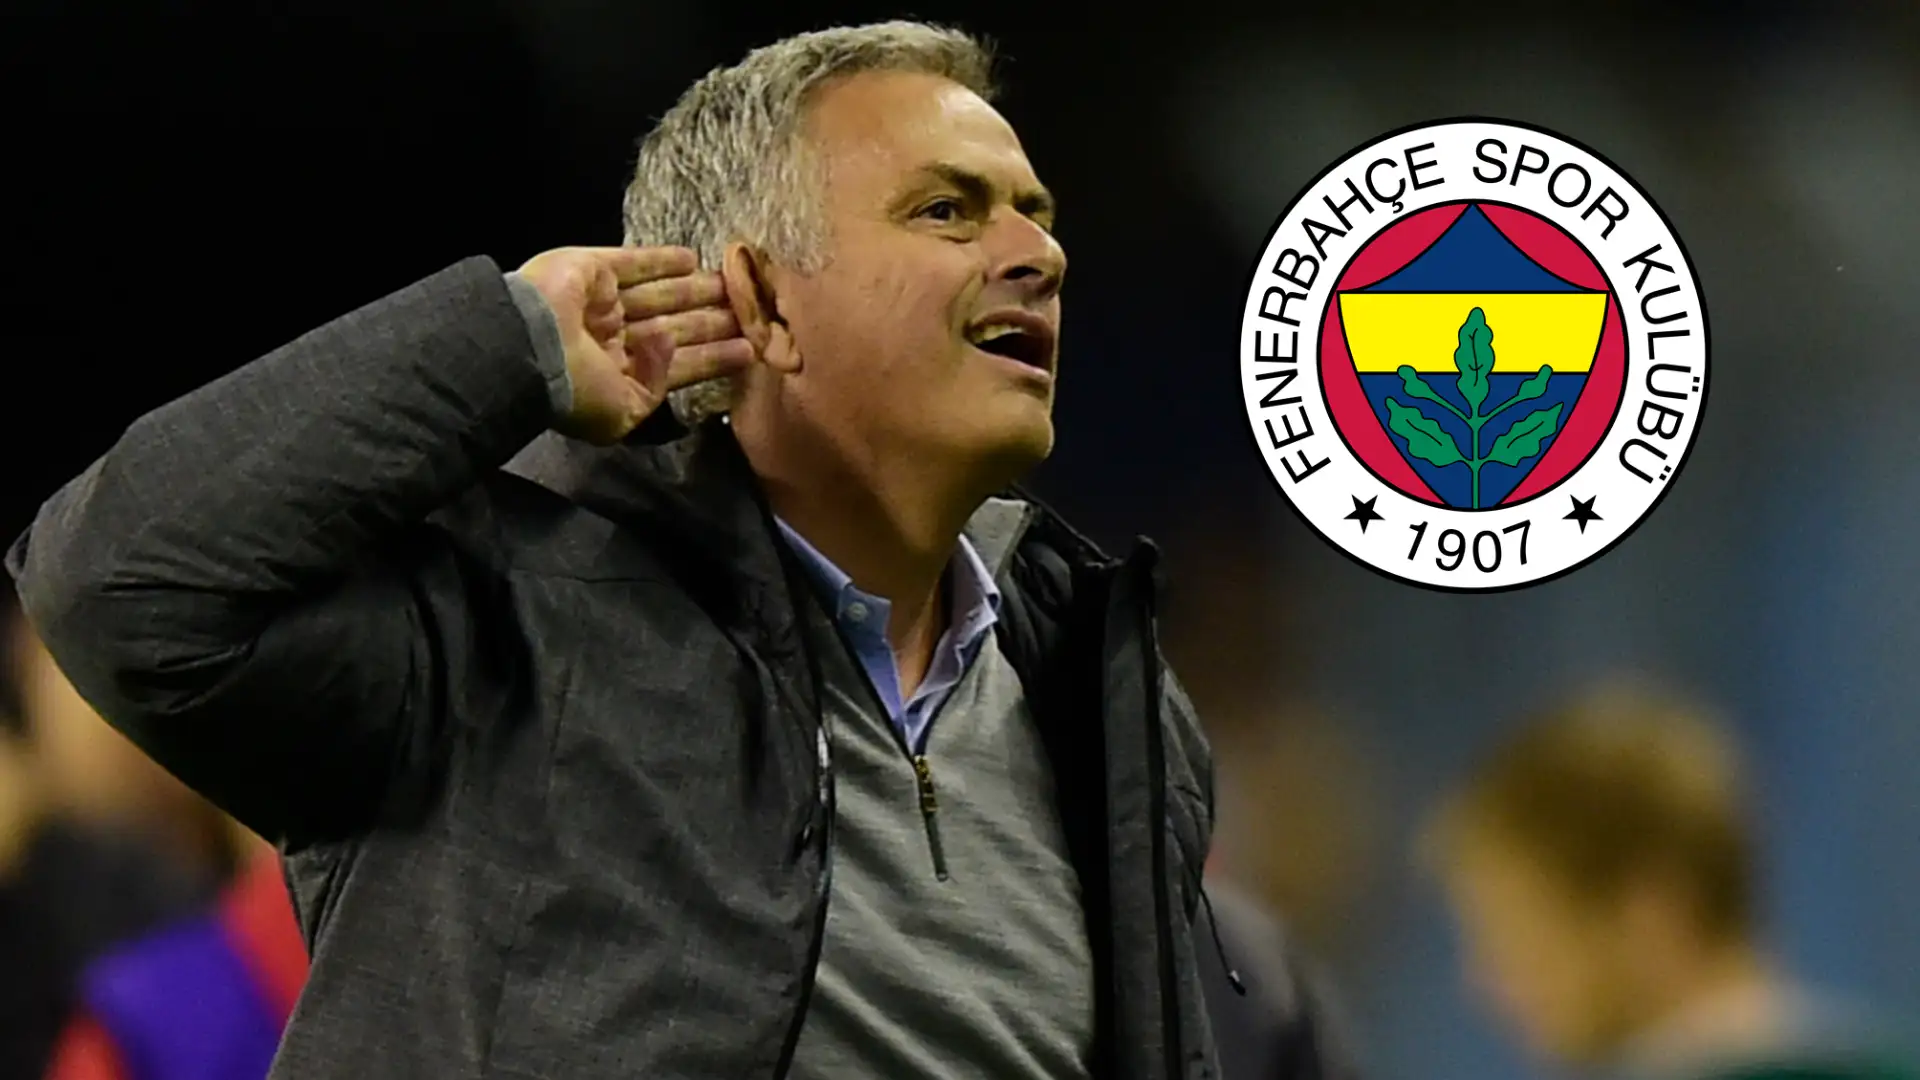 Jose Mourinho issues message to Fenerbahce fans as ex-Man Utd and Real Madrid boss confirms move to Turkish giants